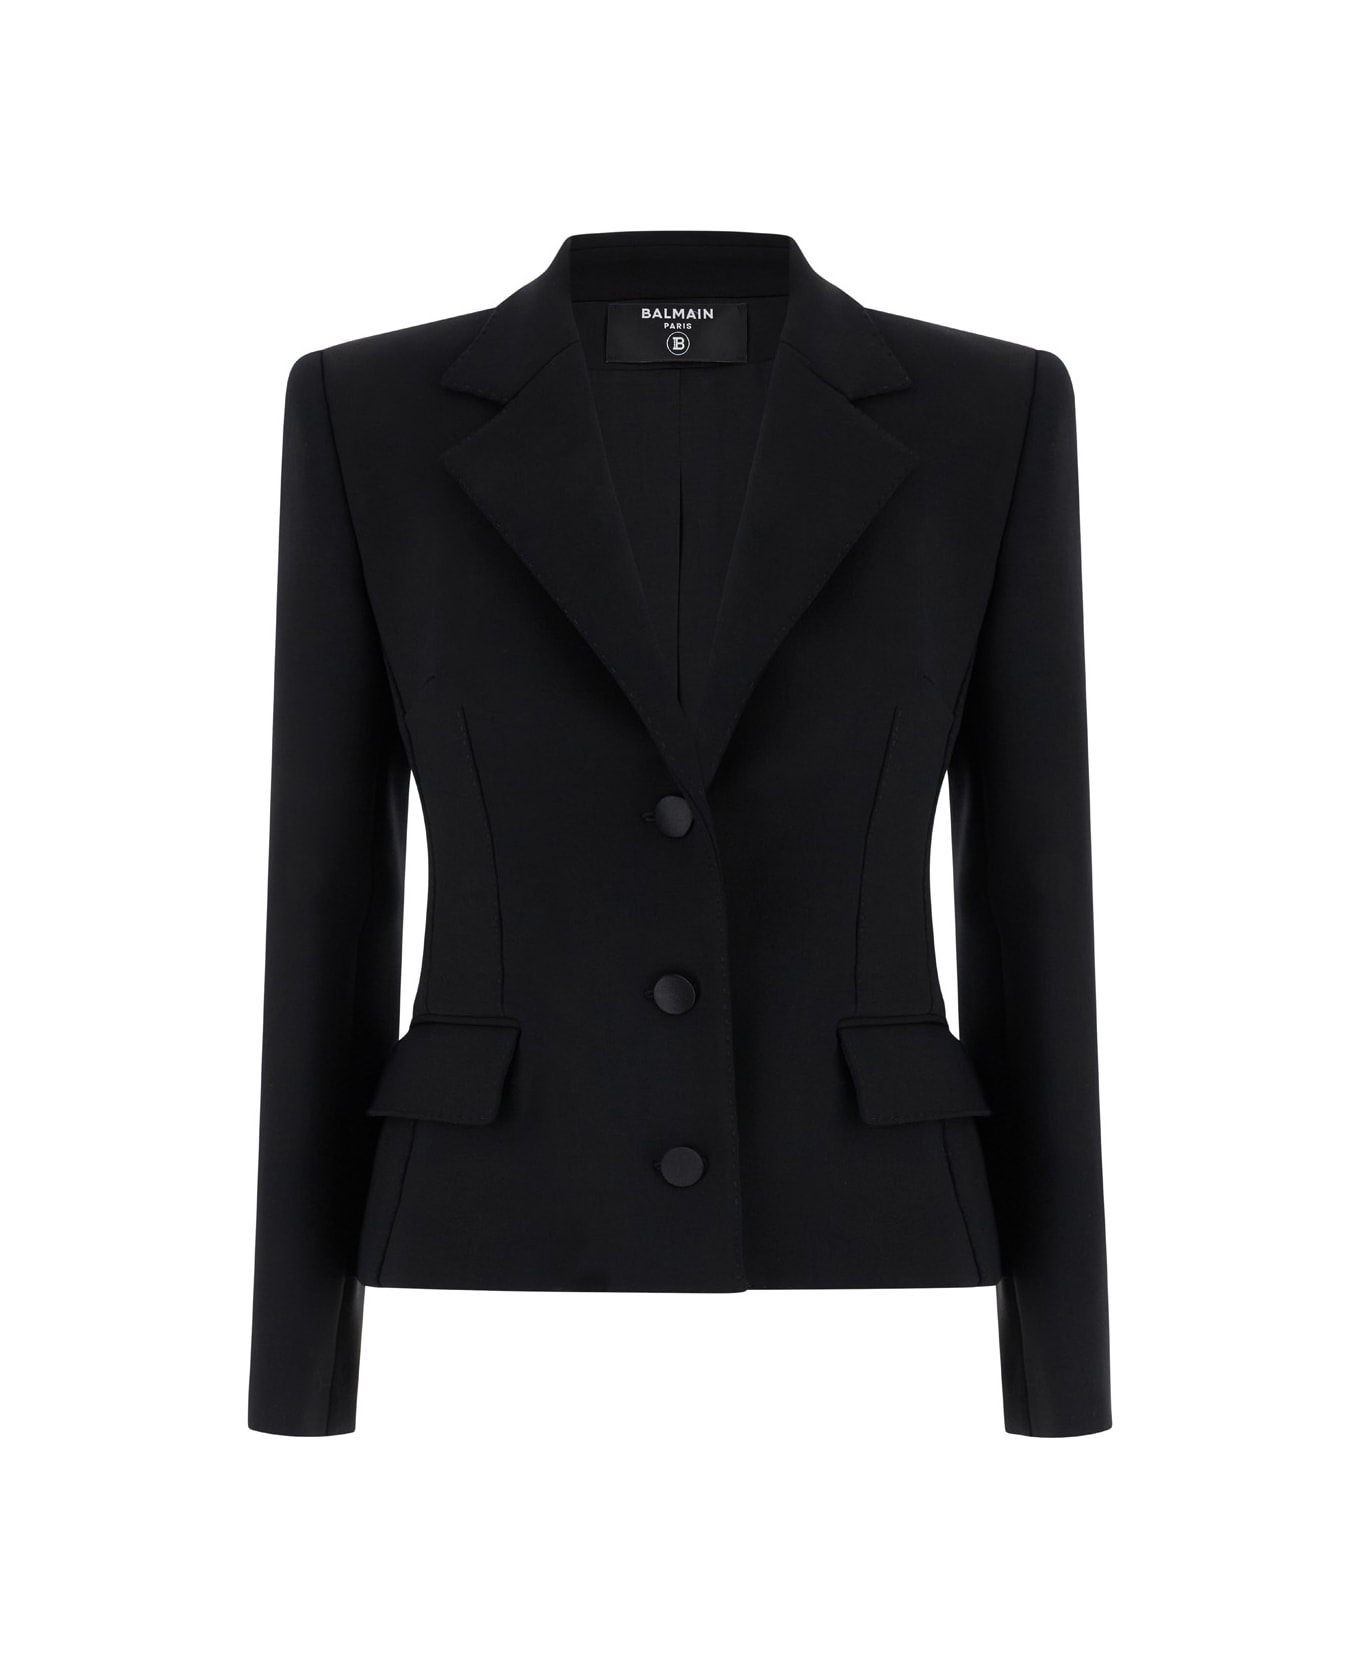 Dolce & Gabbana Black Single-breasted Jacket With Buttons Fastening In Wool Stretch Woman - Black